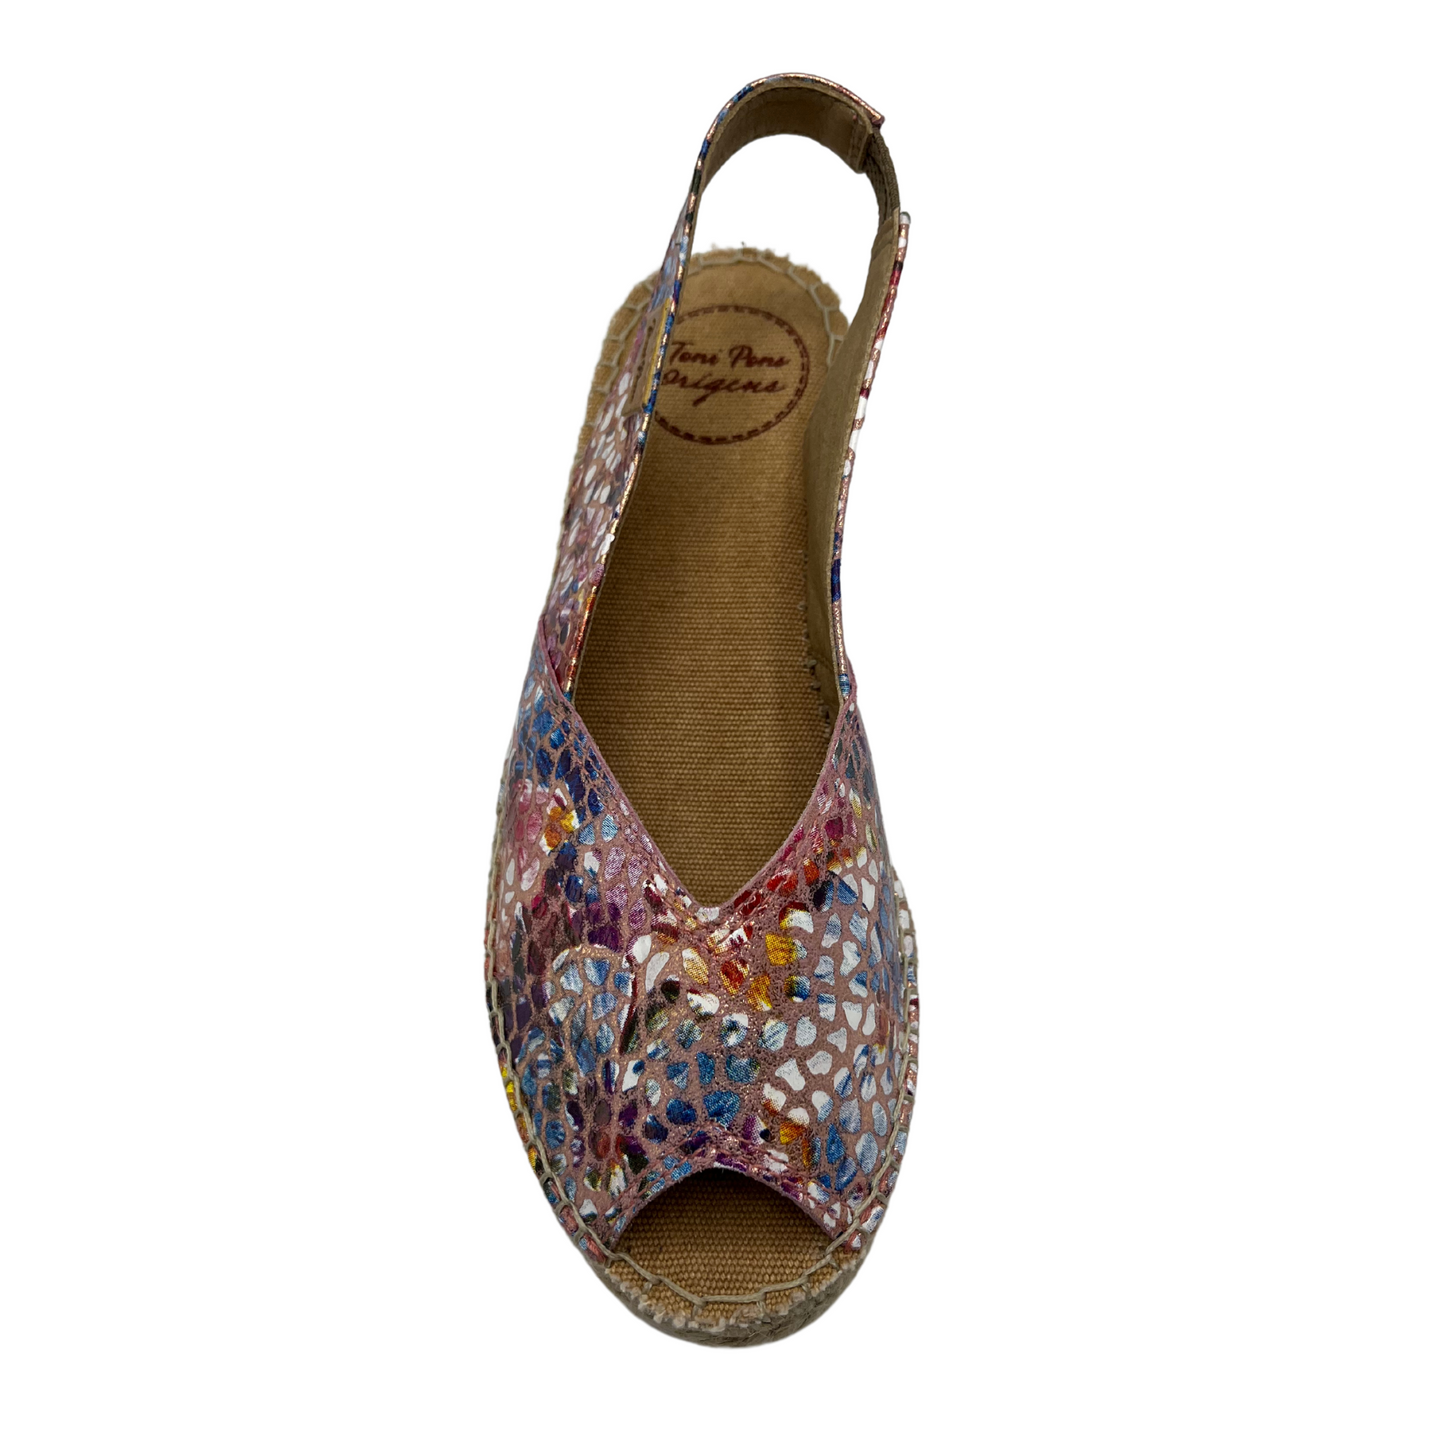 Top view of colourful leather upper espadrille shoe with sling back strap and slight wedge heel.